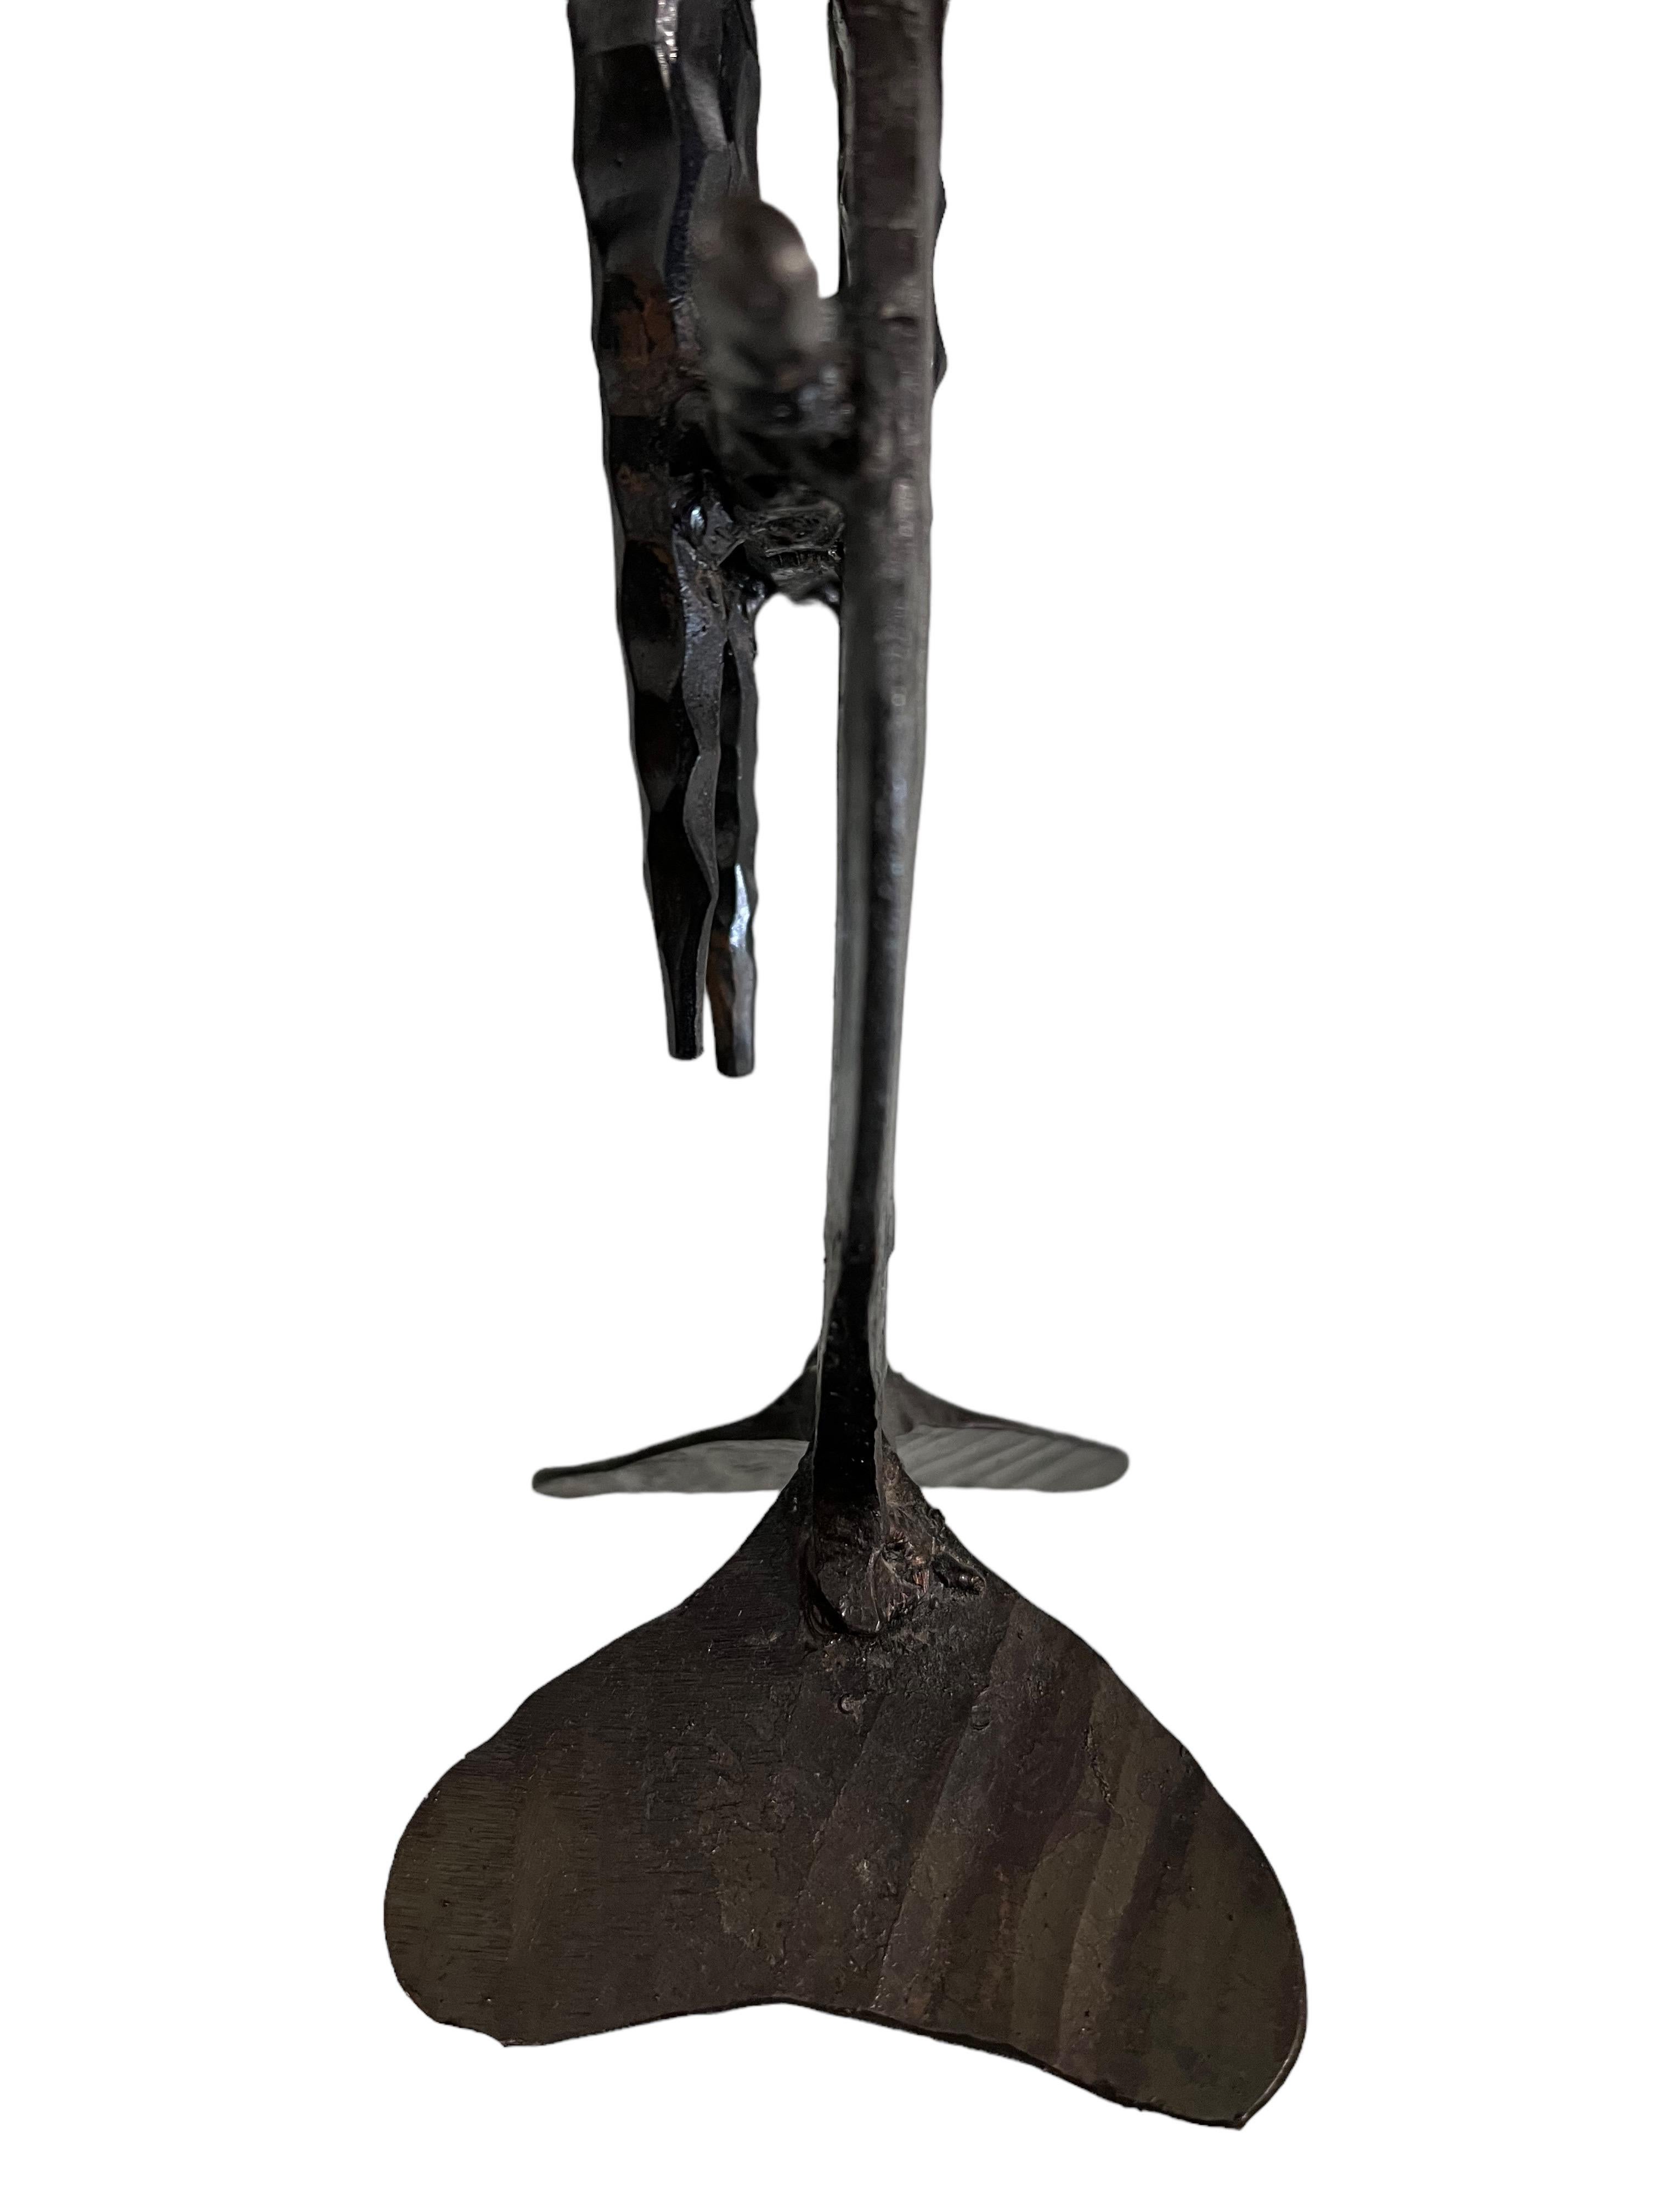 Brutalist Hand Forged Iron Sculpture Candelabra Candle Stick Israeli Art Palombo For Sale 4